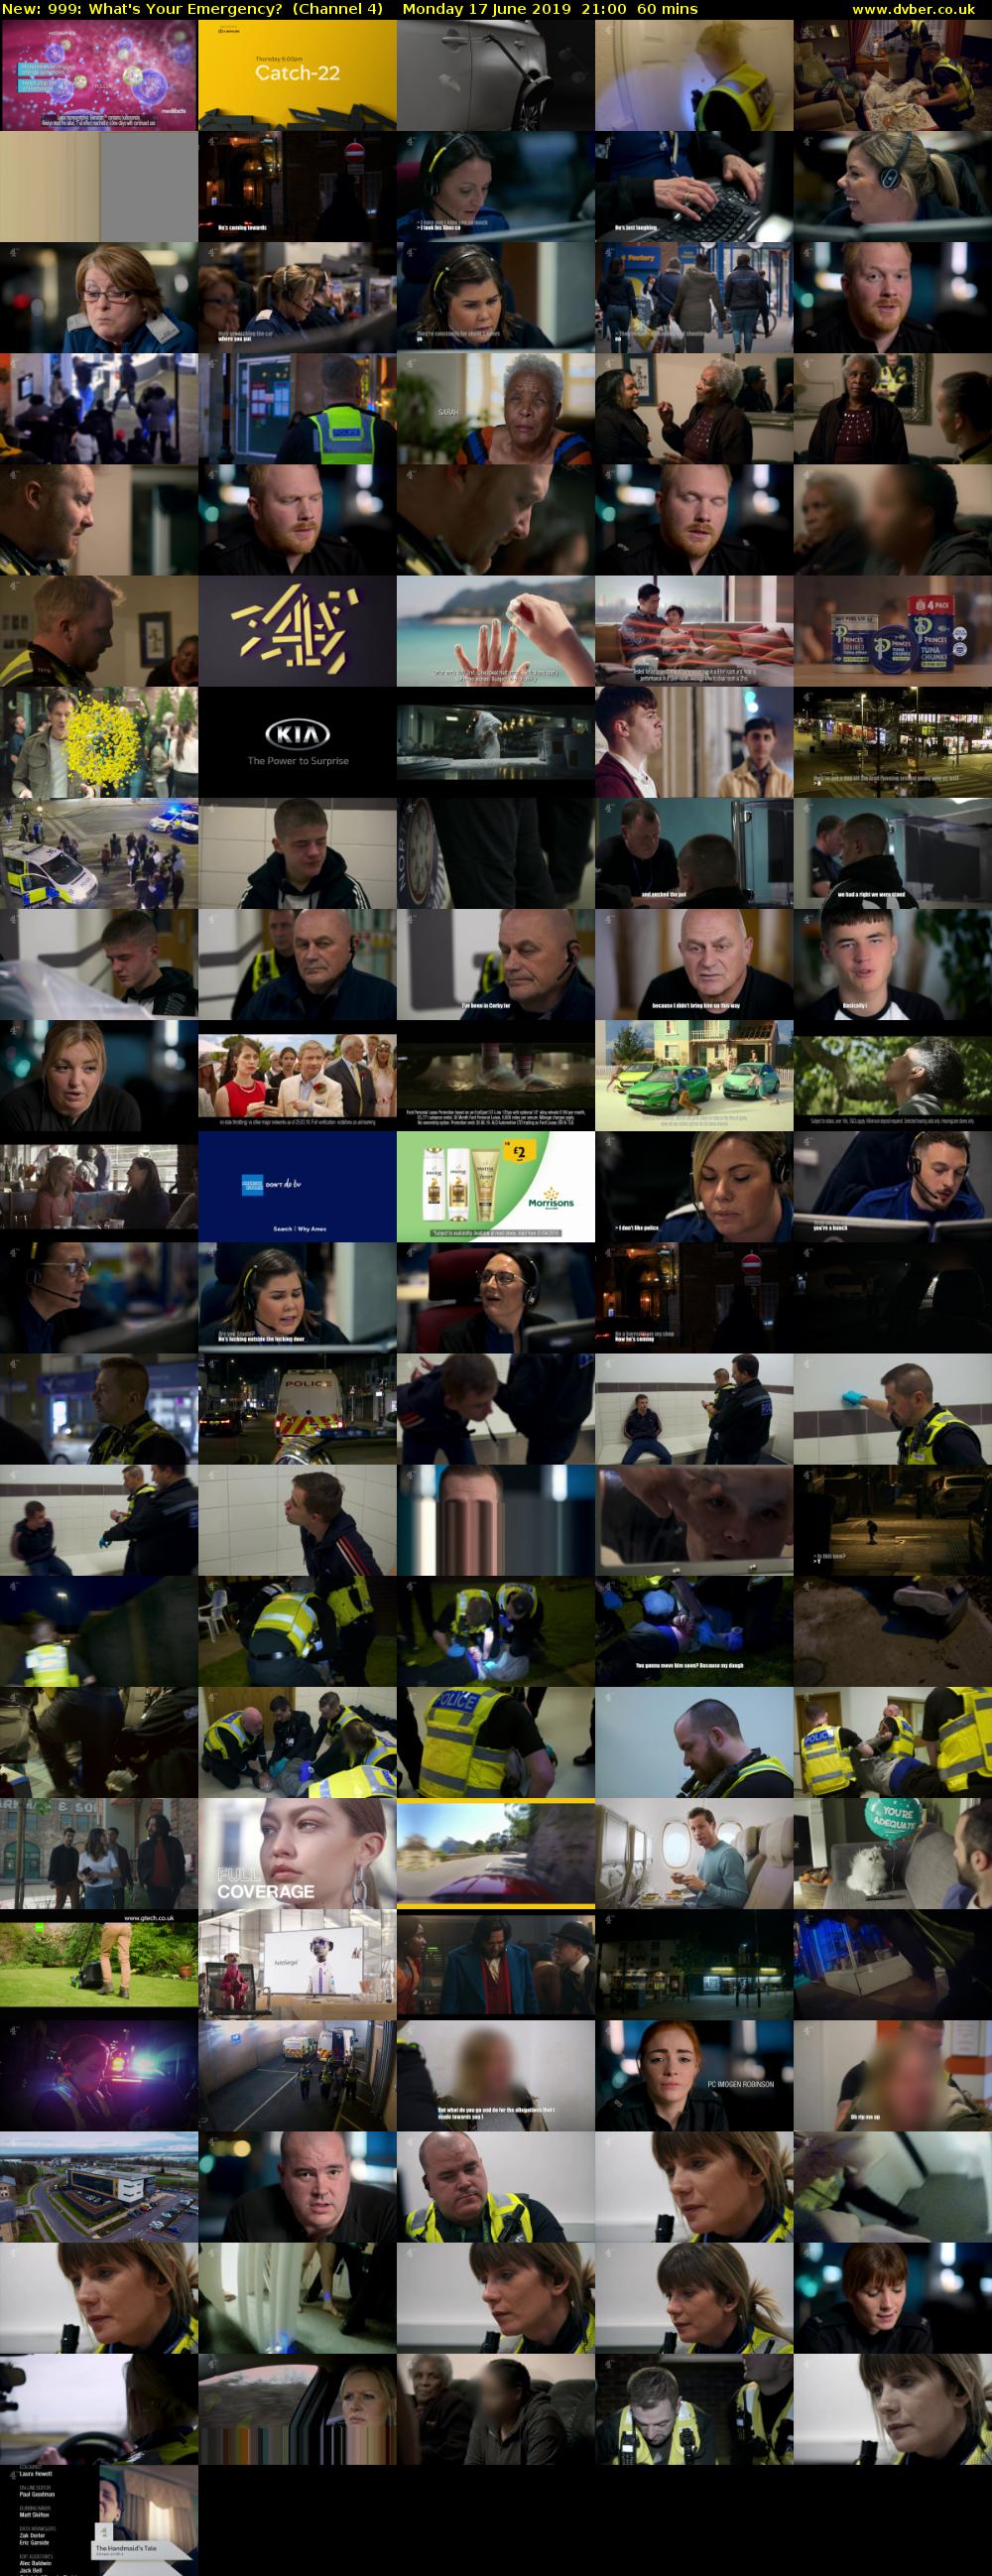 999: What's Your Emergency? (Channel 4) Monday 17 June 2019 21:00 - 22:00